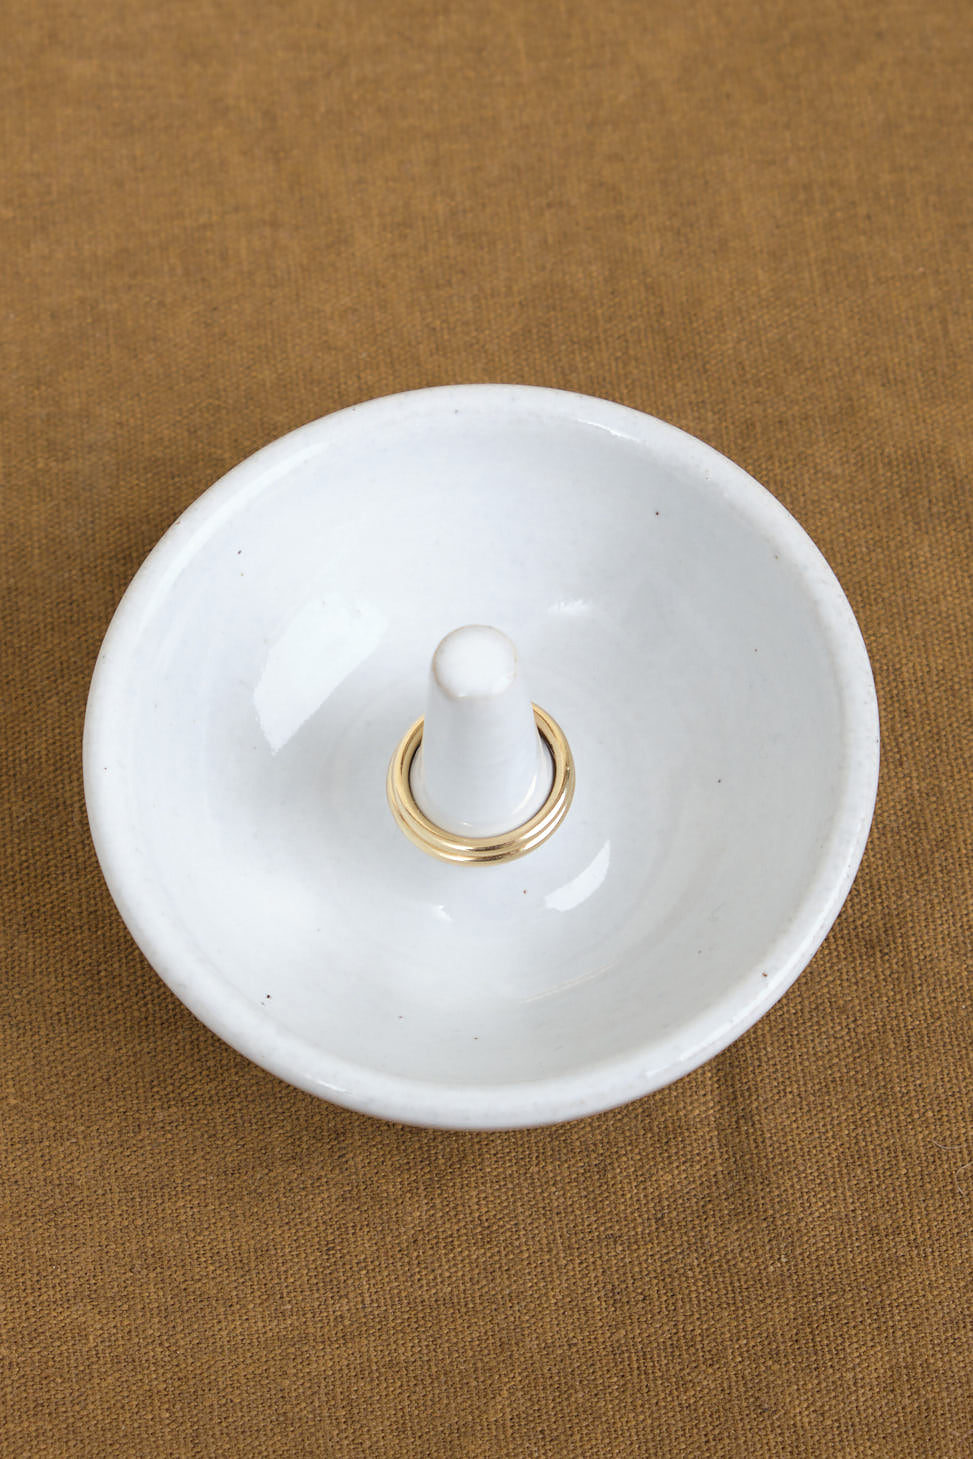 Top of Ring Dish